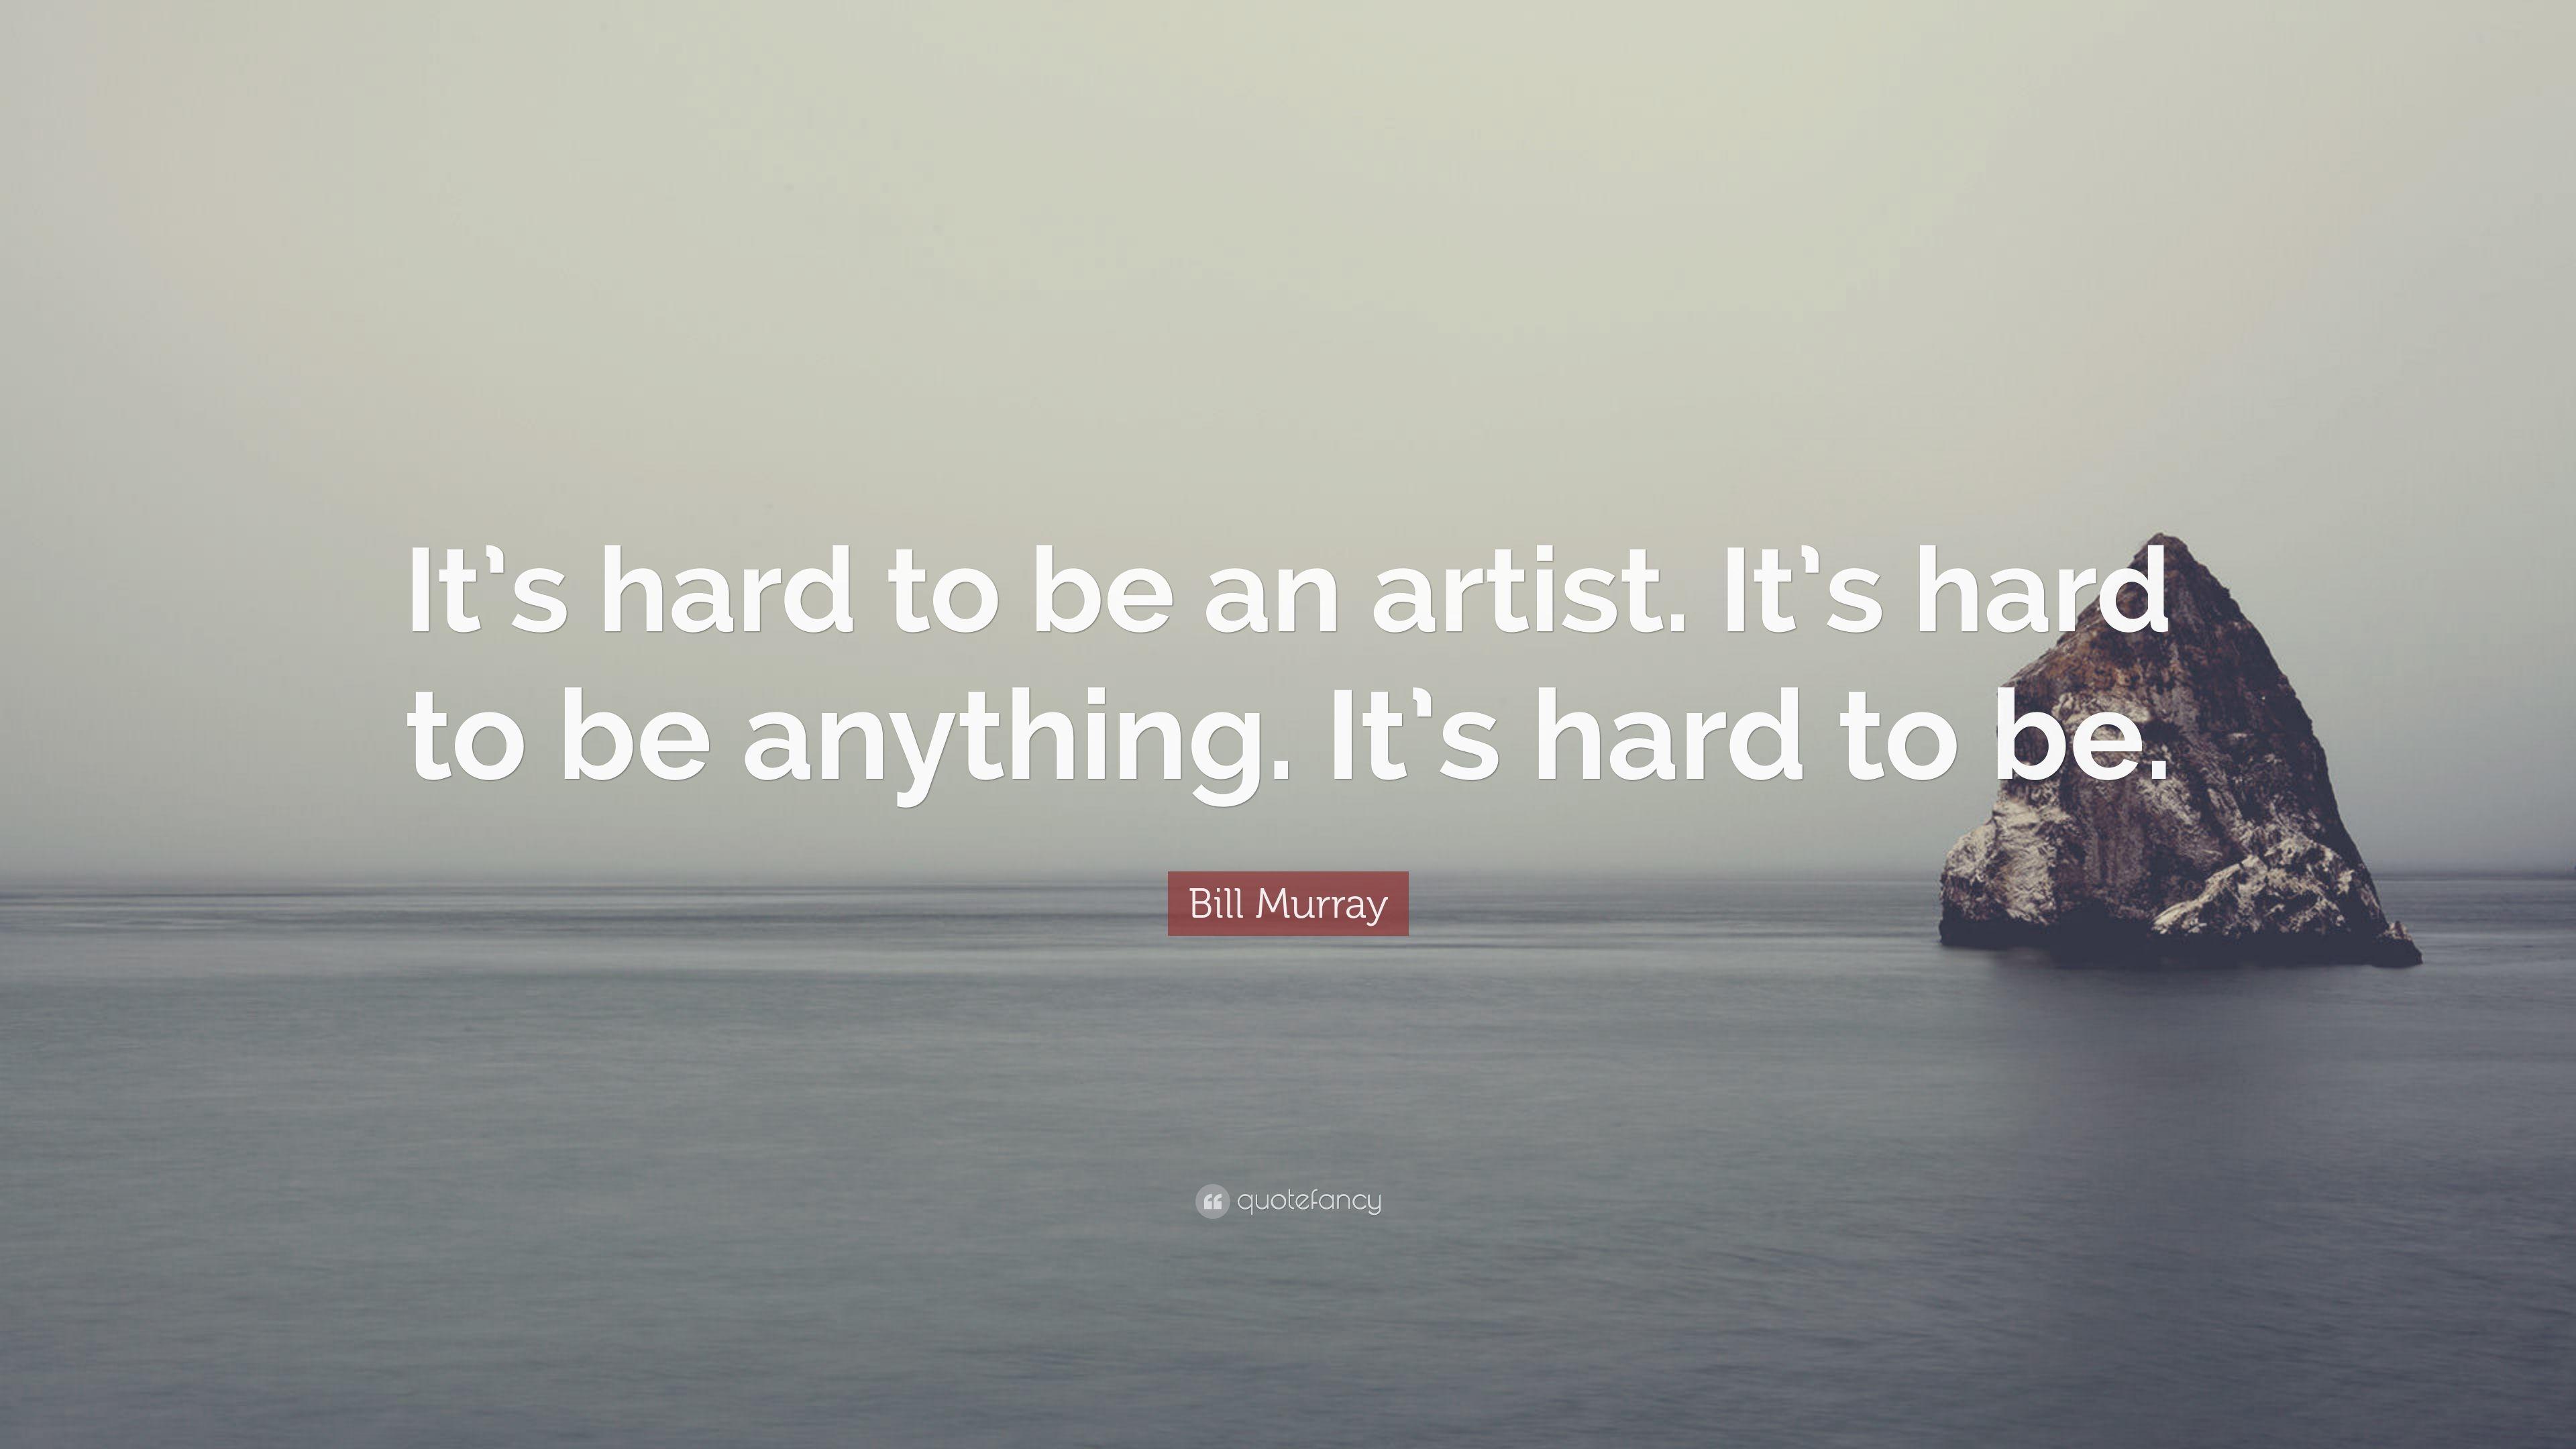 Bill Murray Quote: “It's hard to be an artist. It's hard to be